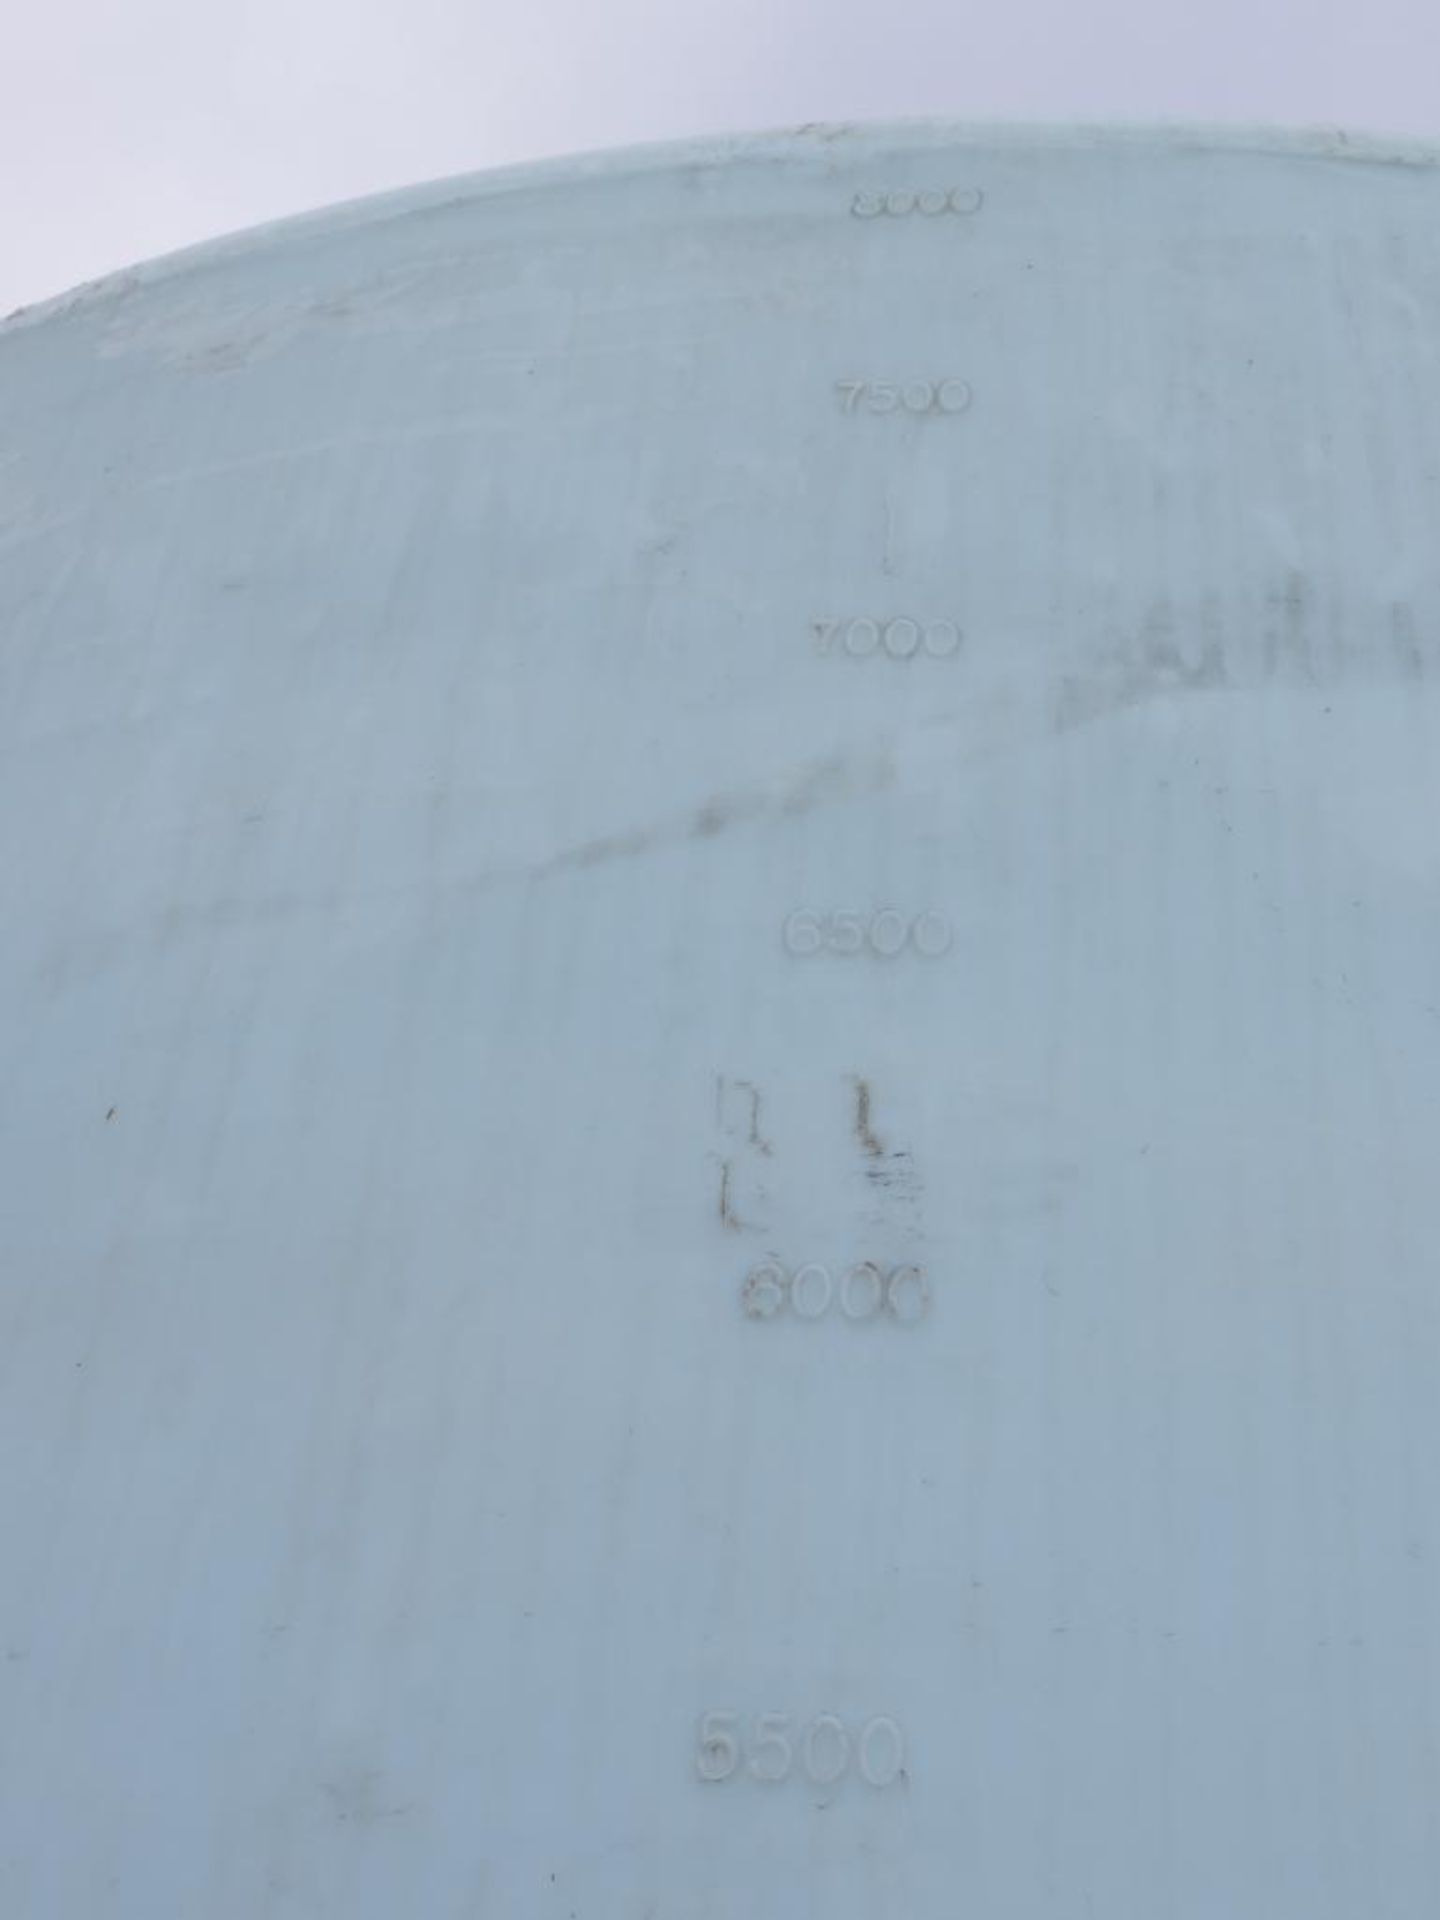 Poxy Storage Tank Approx. 8,000 Gallons - Image 2 of 3